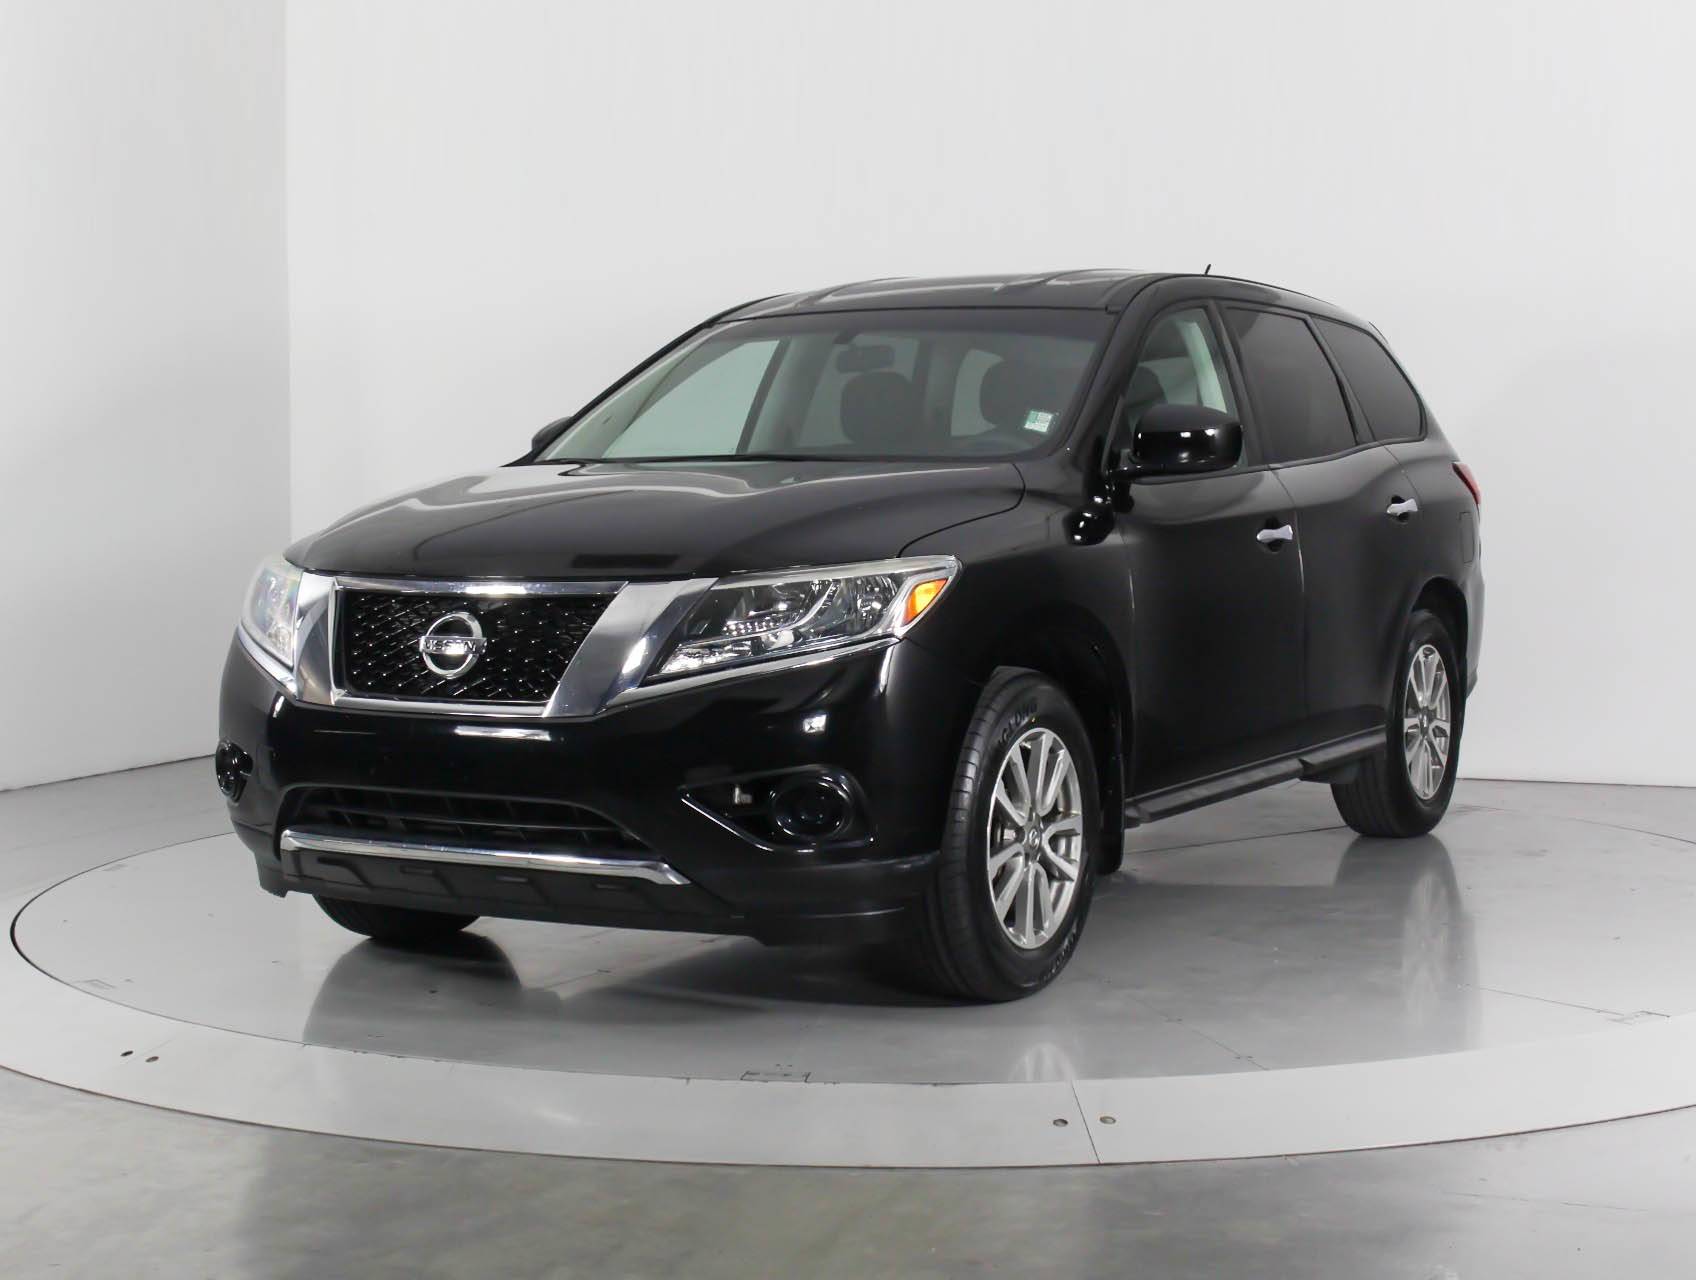 Florida Fine Cars - Used NISSAN PATHFINDER 2013 WEST PALM 4wd S